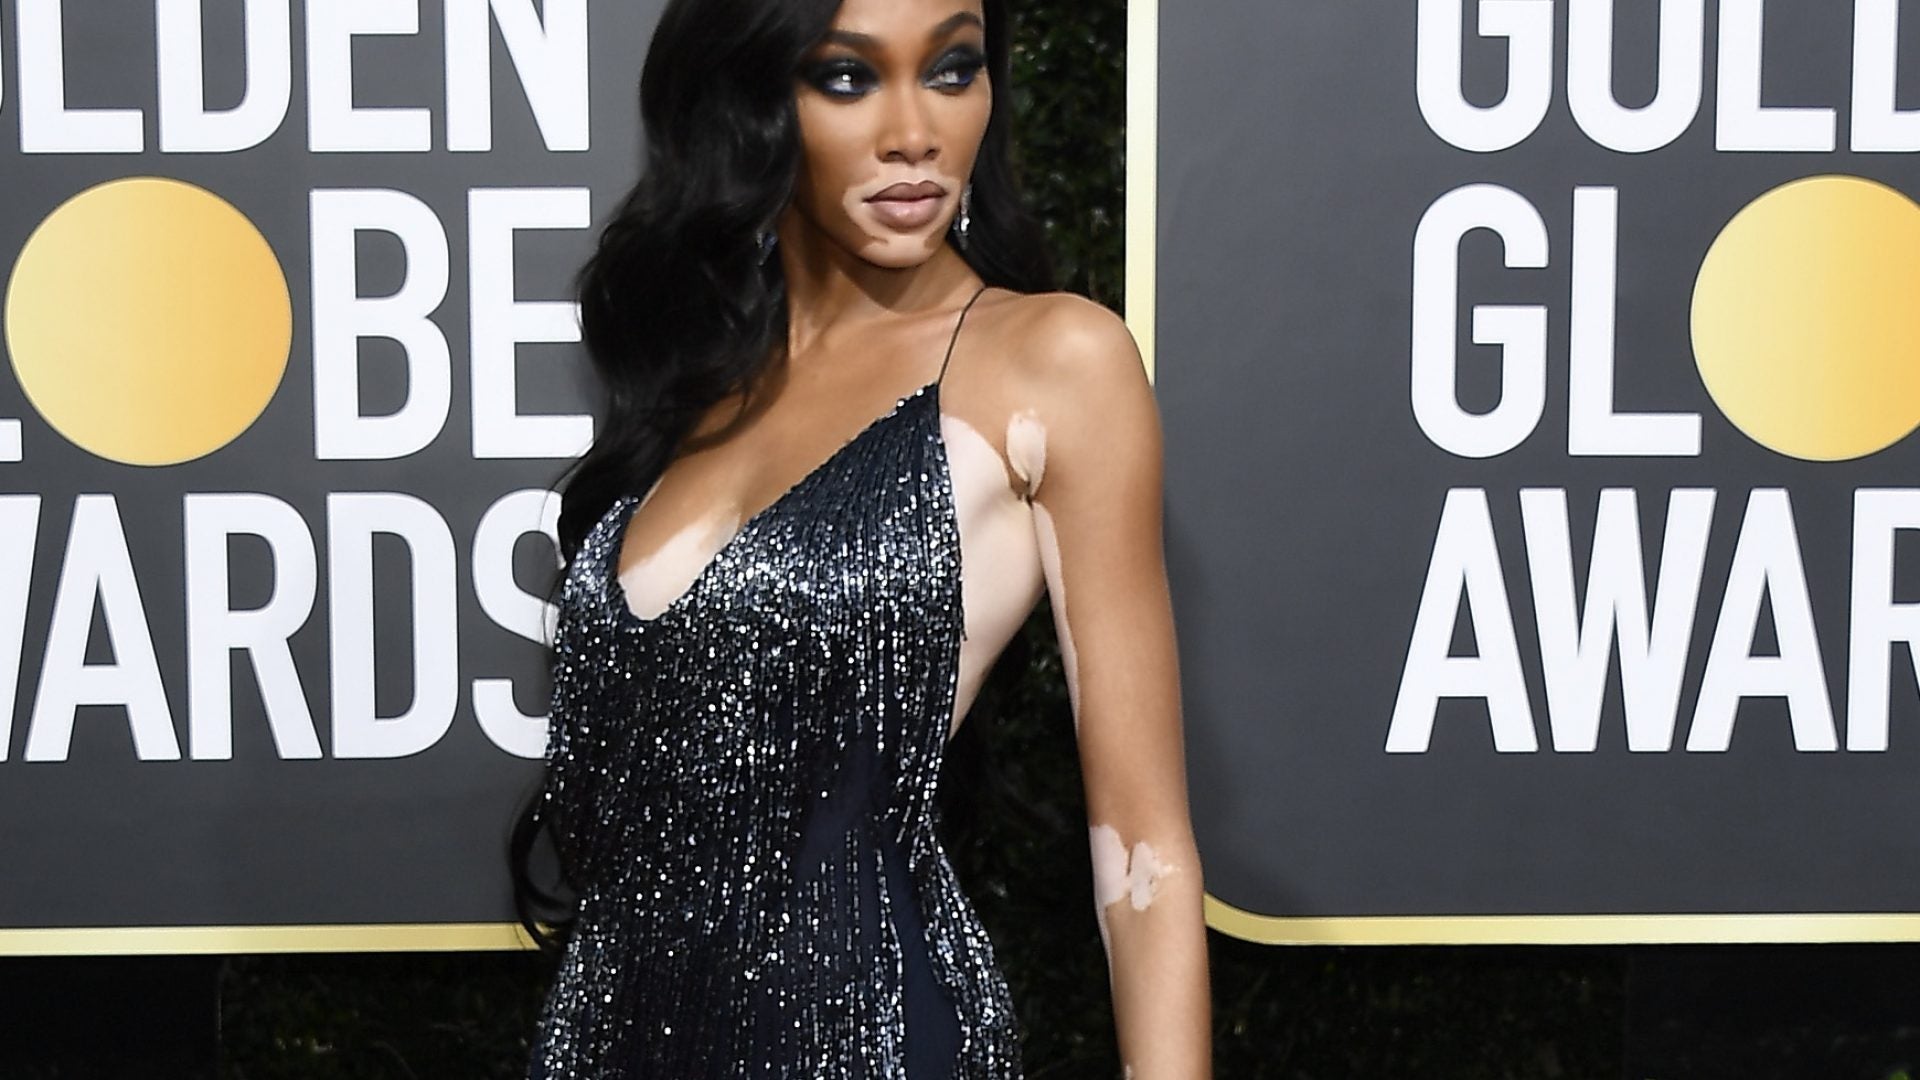 The Best Fashion Moments From The 2020 Golden Globes